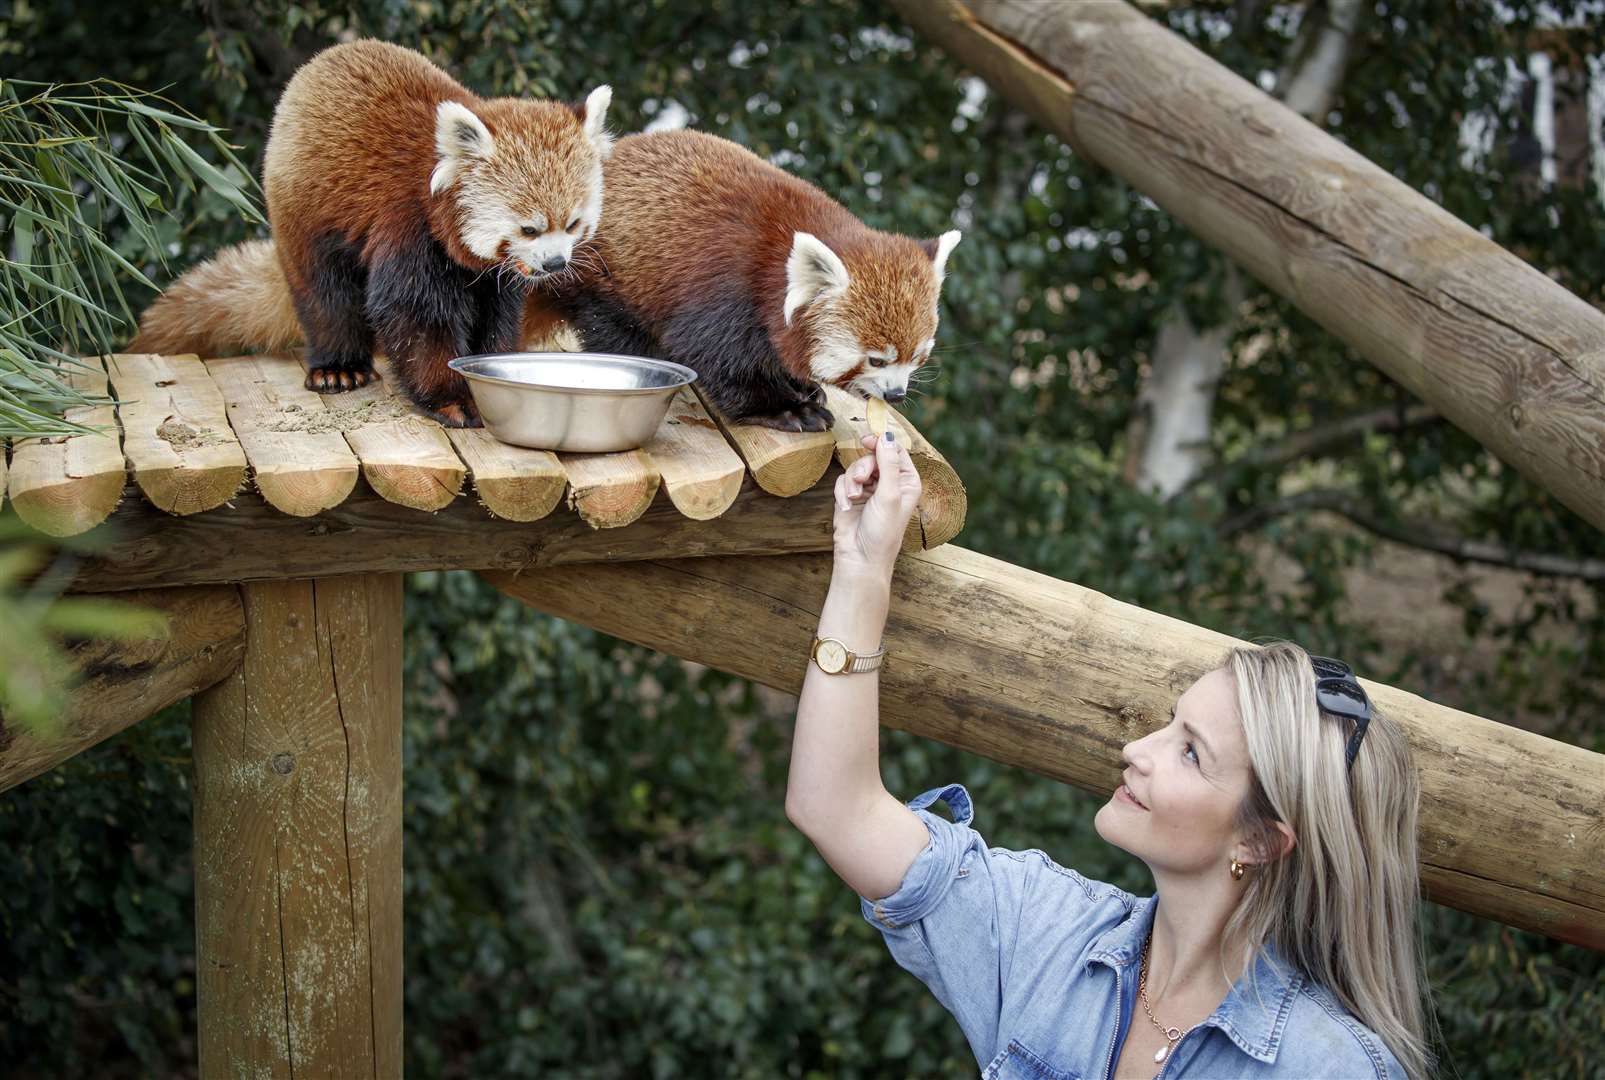 Countryfile presenter Helen Skelton feeds a red panda during a visit to the Yorkshire Wildlife Park (Danny Lawson/PA)